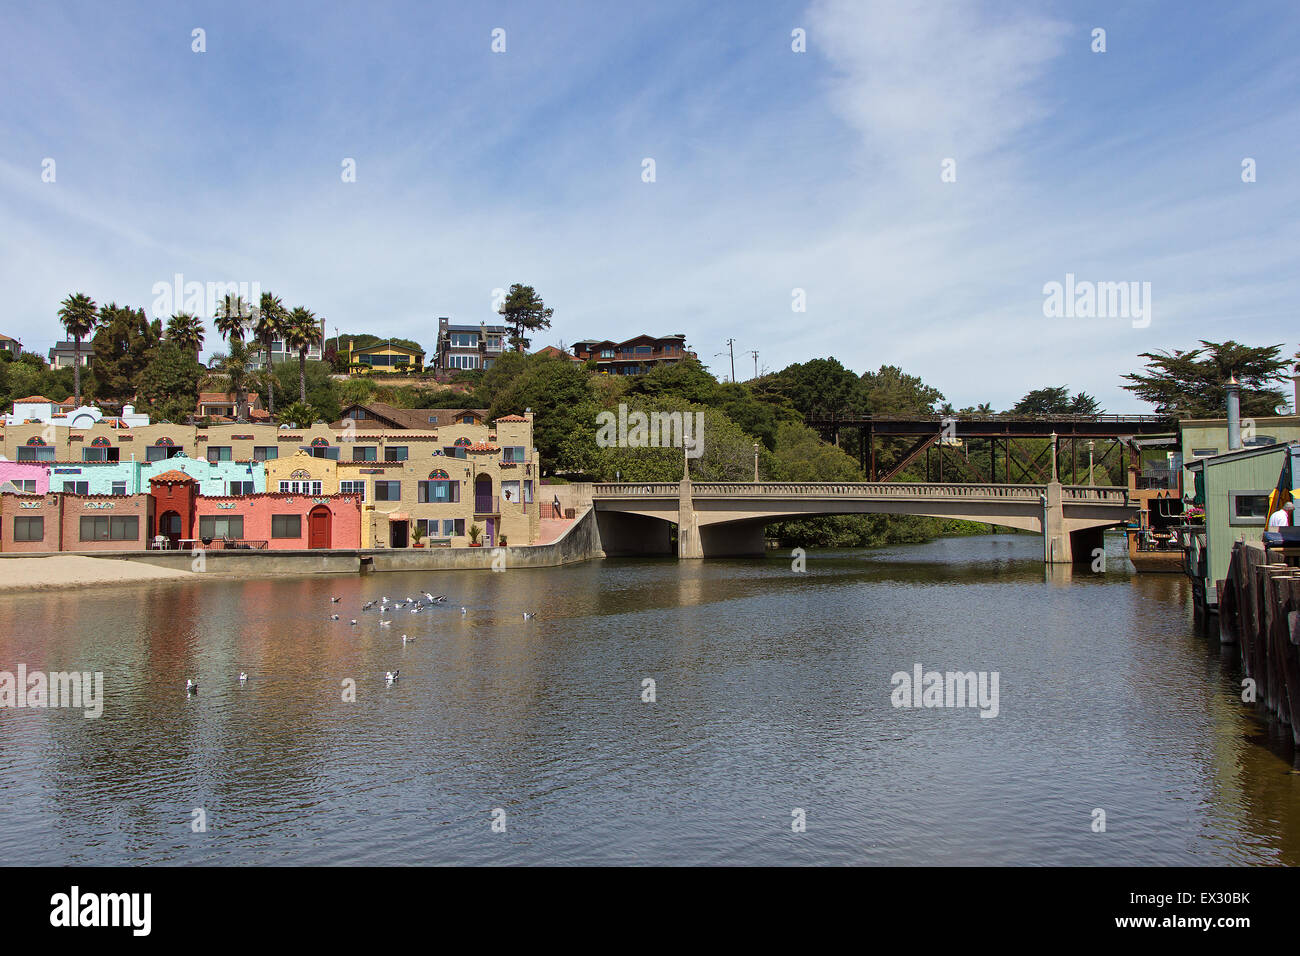 Scenic bungalows on the beach in Capitola, California Stock Photo